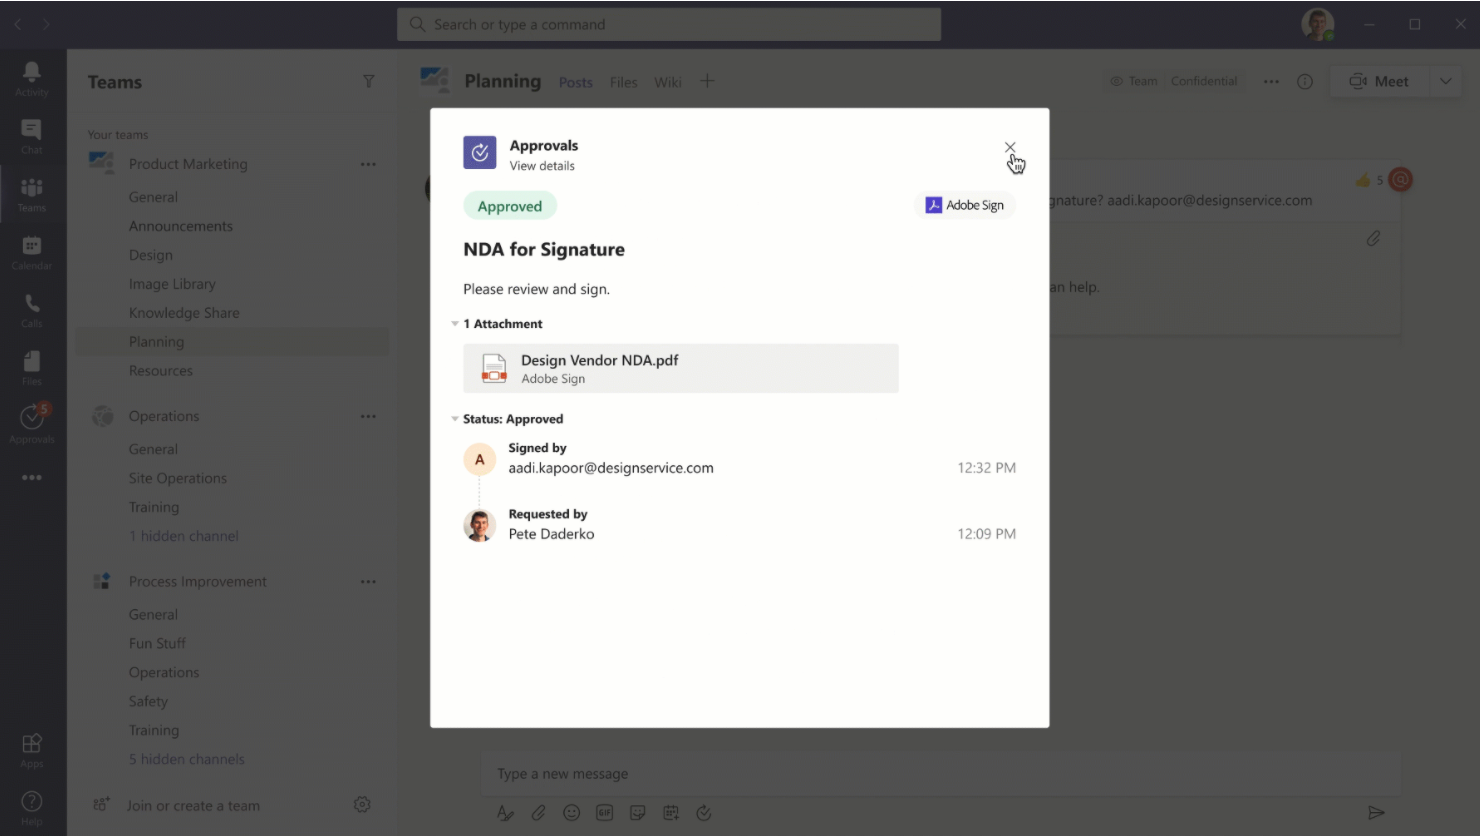 Get results faster with Approvals in Microsoft Teams